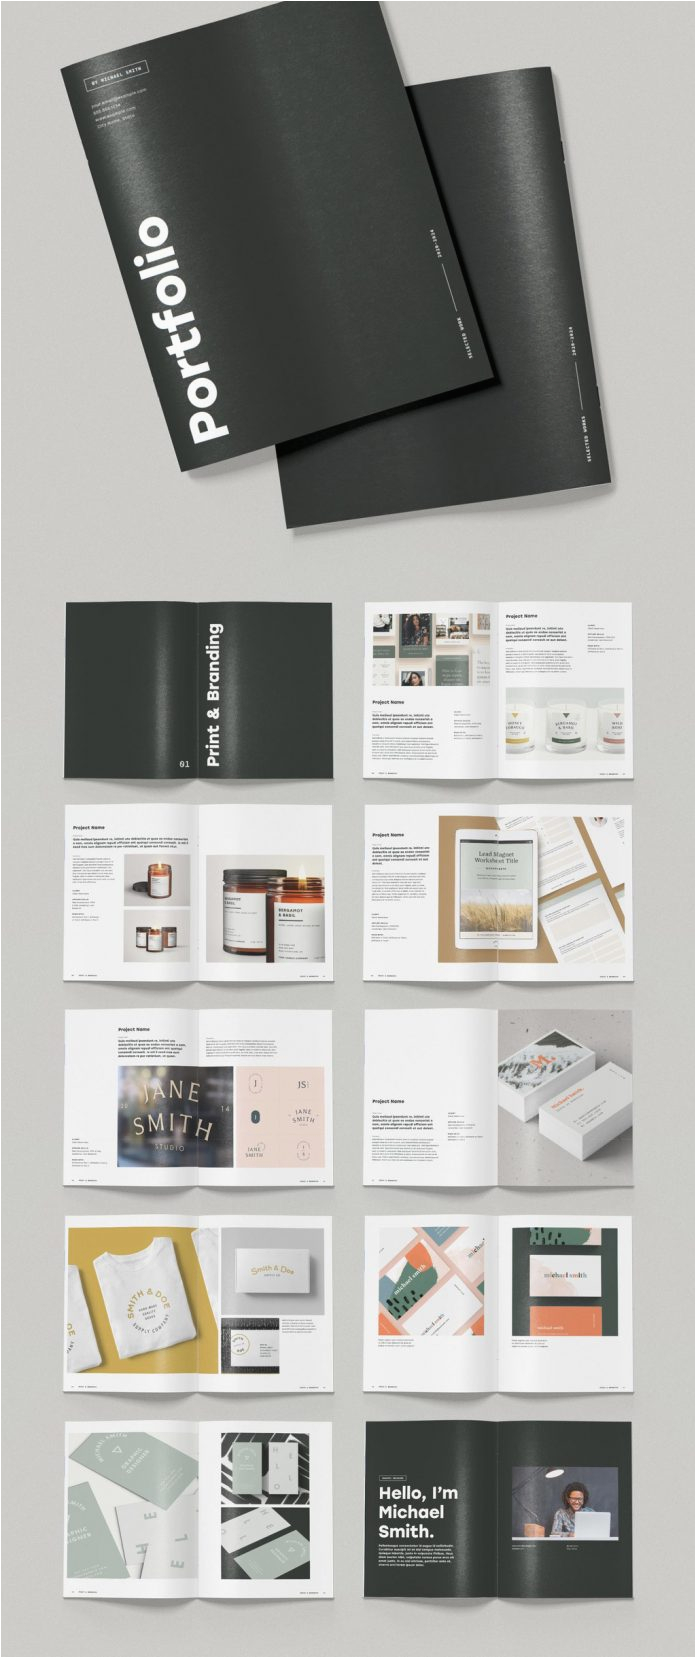 Minimalist Portfolio & Resume after Effects Template Free Download Minimalist Portfolio Brochure Template with Bold Typography